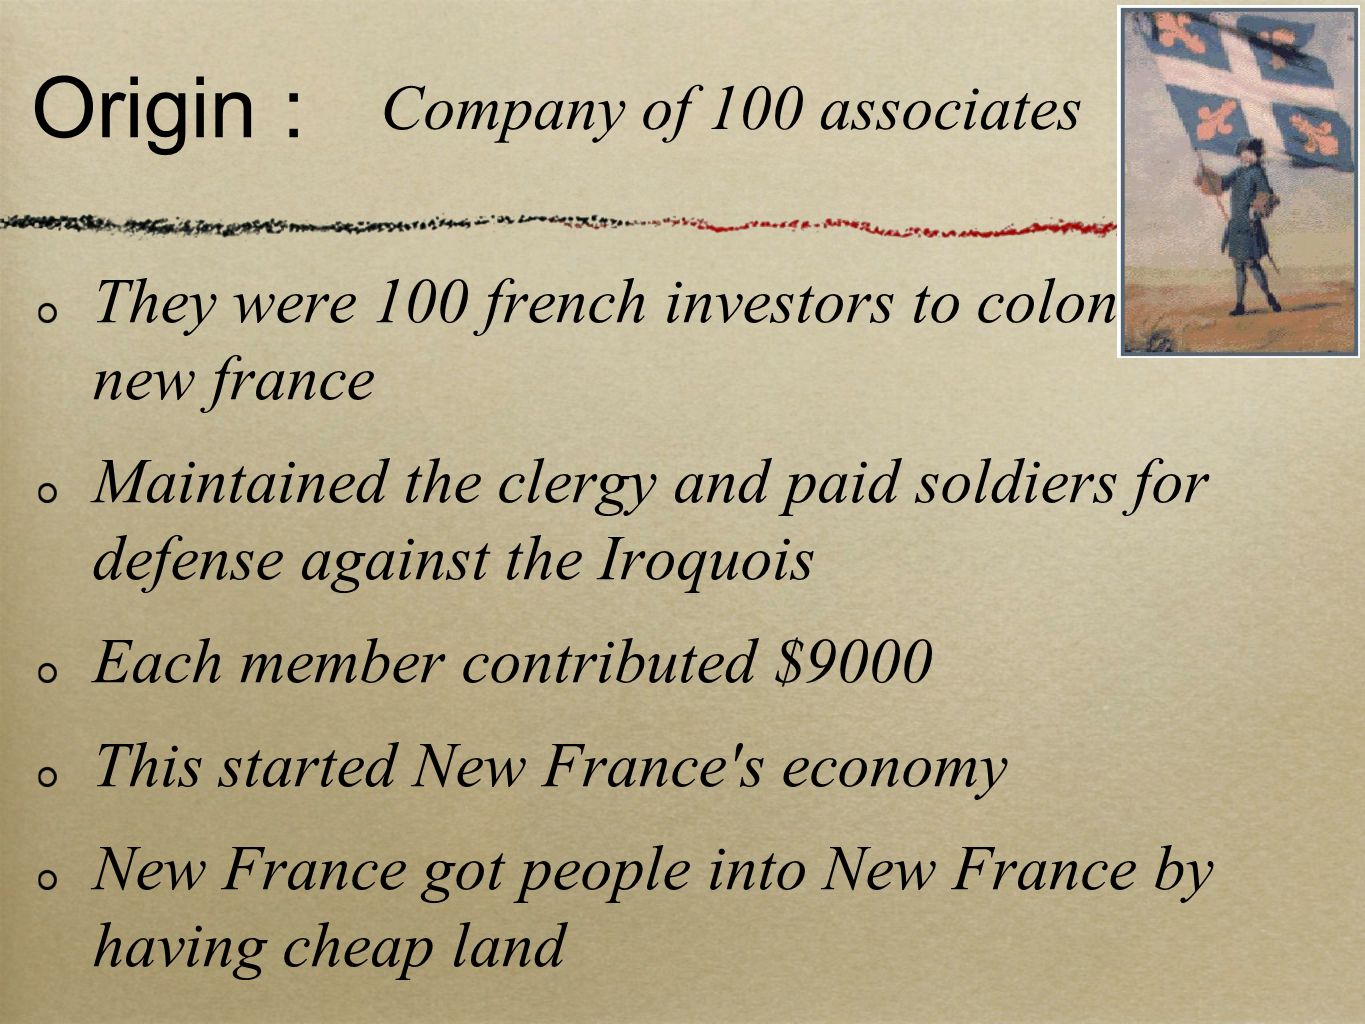 Origin : They were 100 french investors to colonize new france Maintained the clergy and paid soldiers for defense against the Iroquois Each member contributed $9000 This started New France s economy New France got people into New France by having cheap land Company of 100 associates